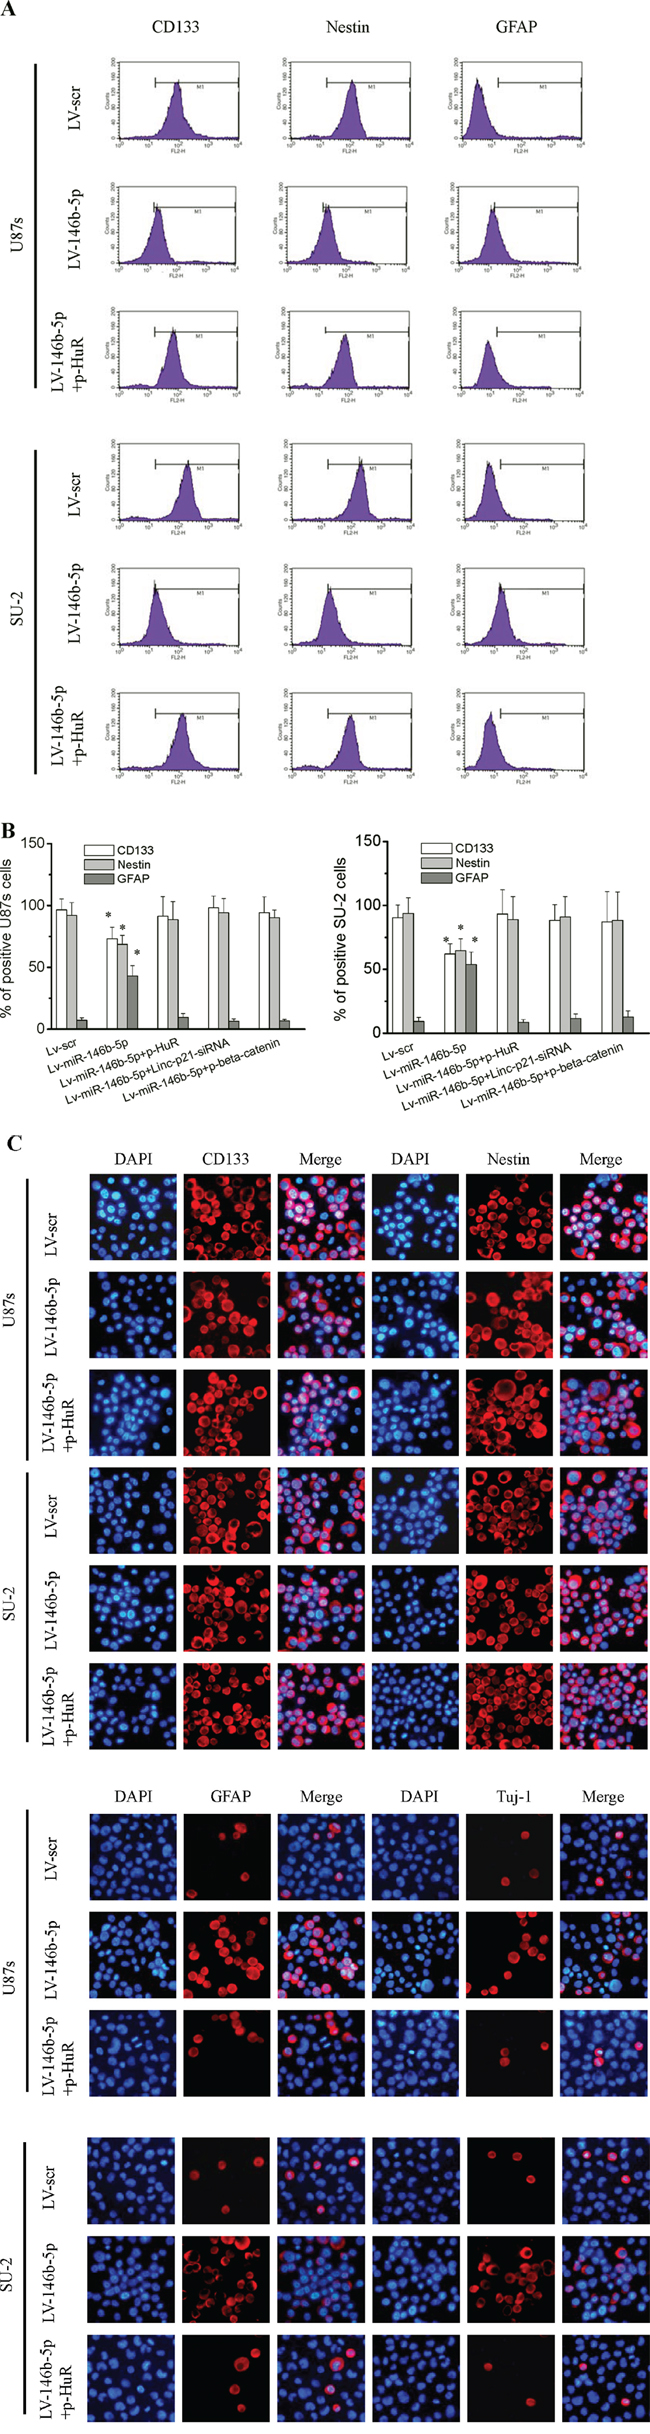 MiR-146b-5p overexpression decreased stemness and induced differentiation in GSCs.